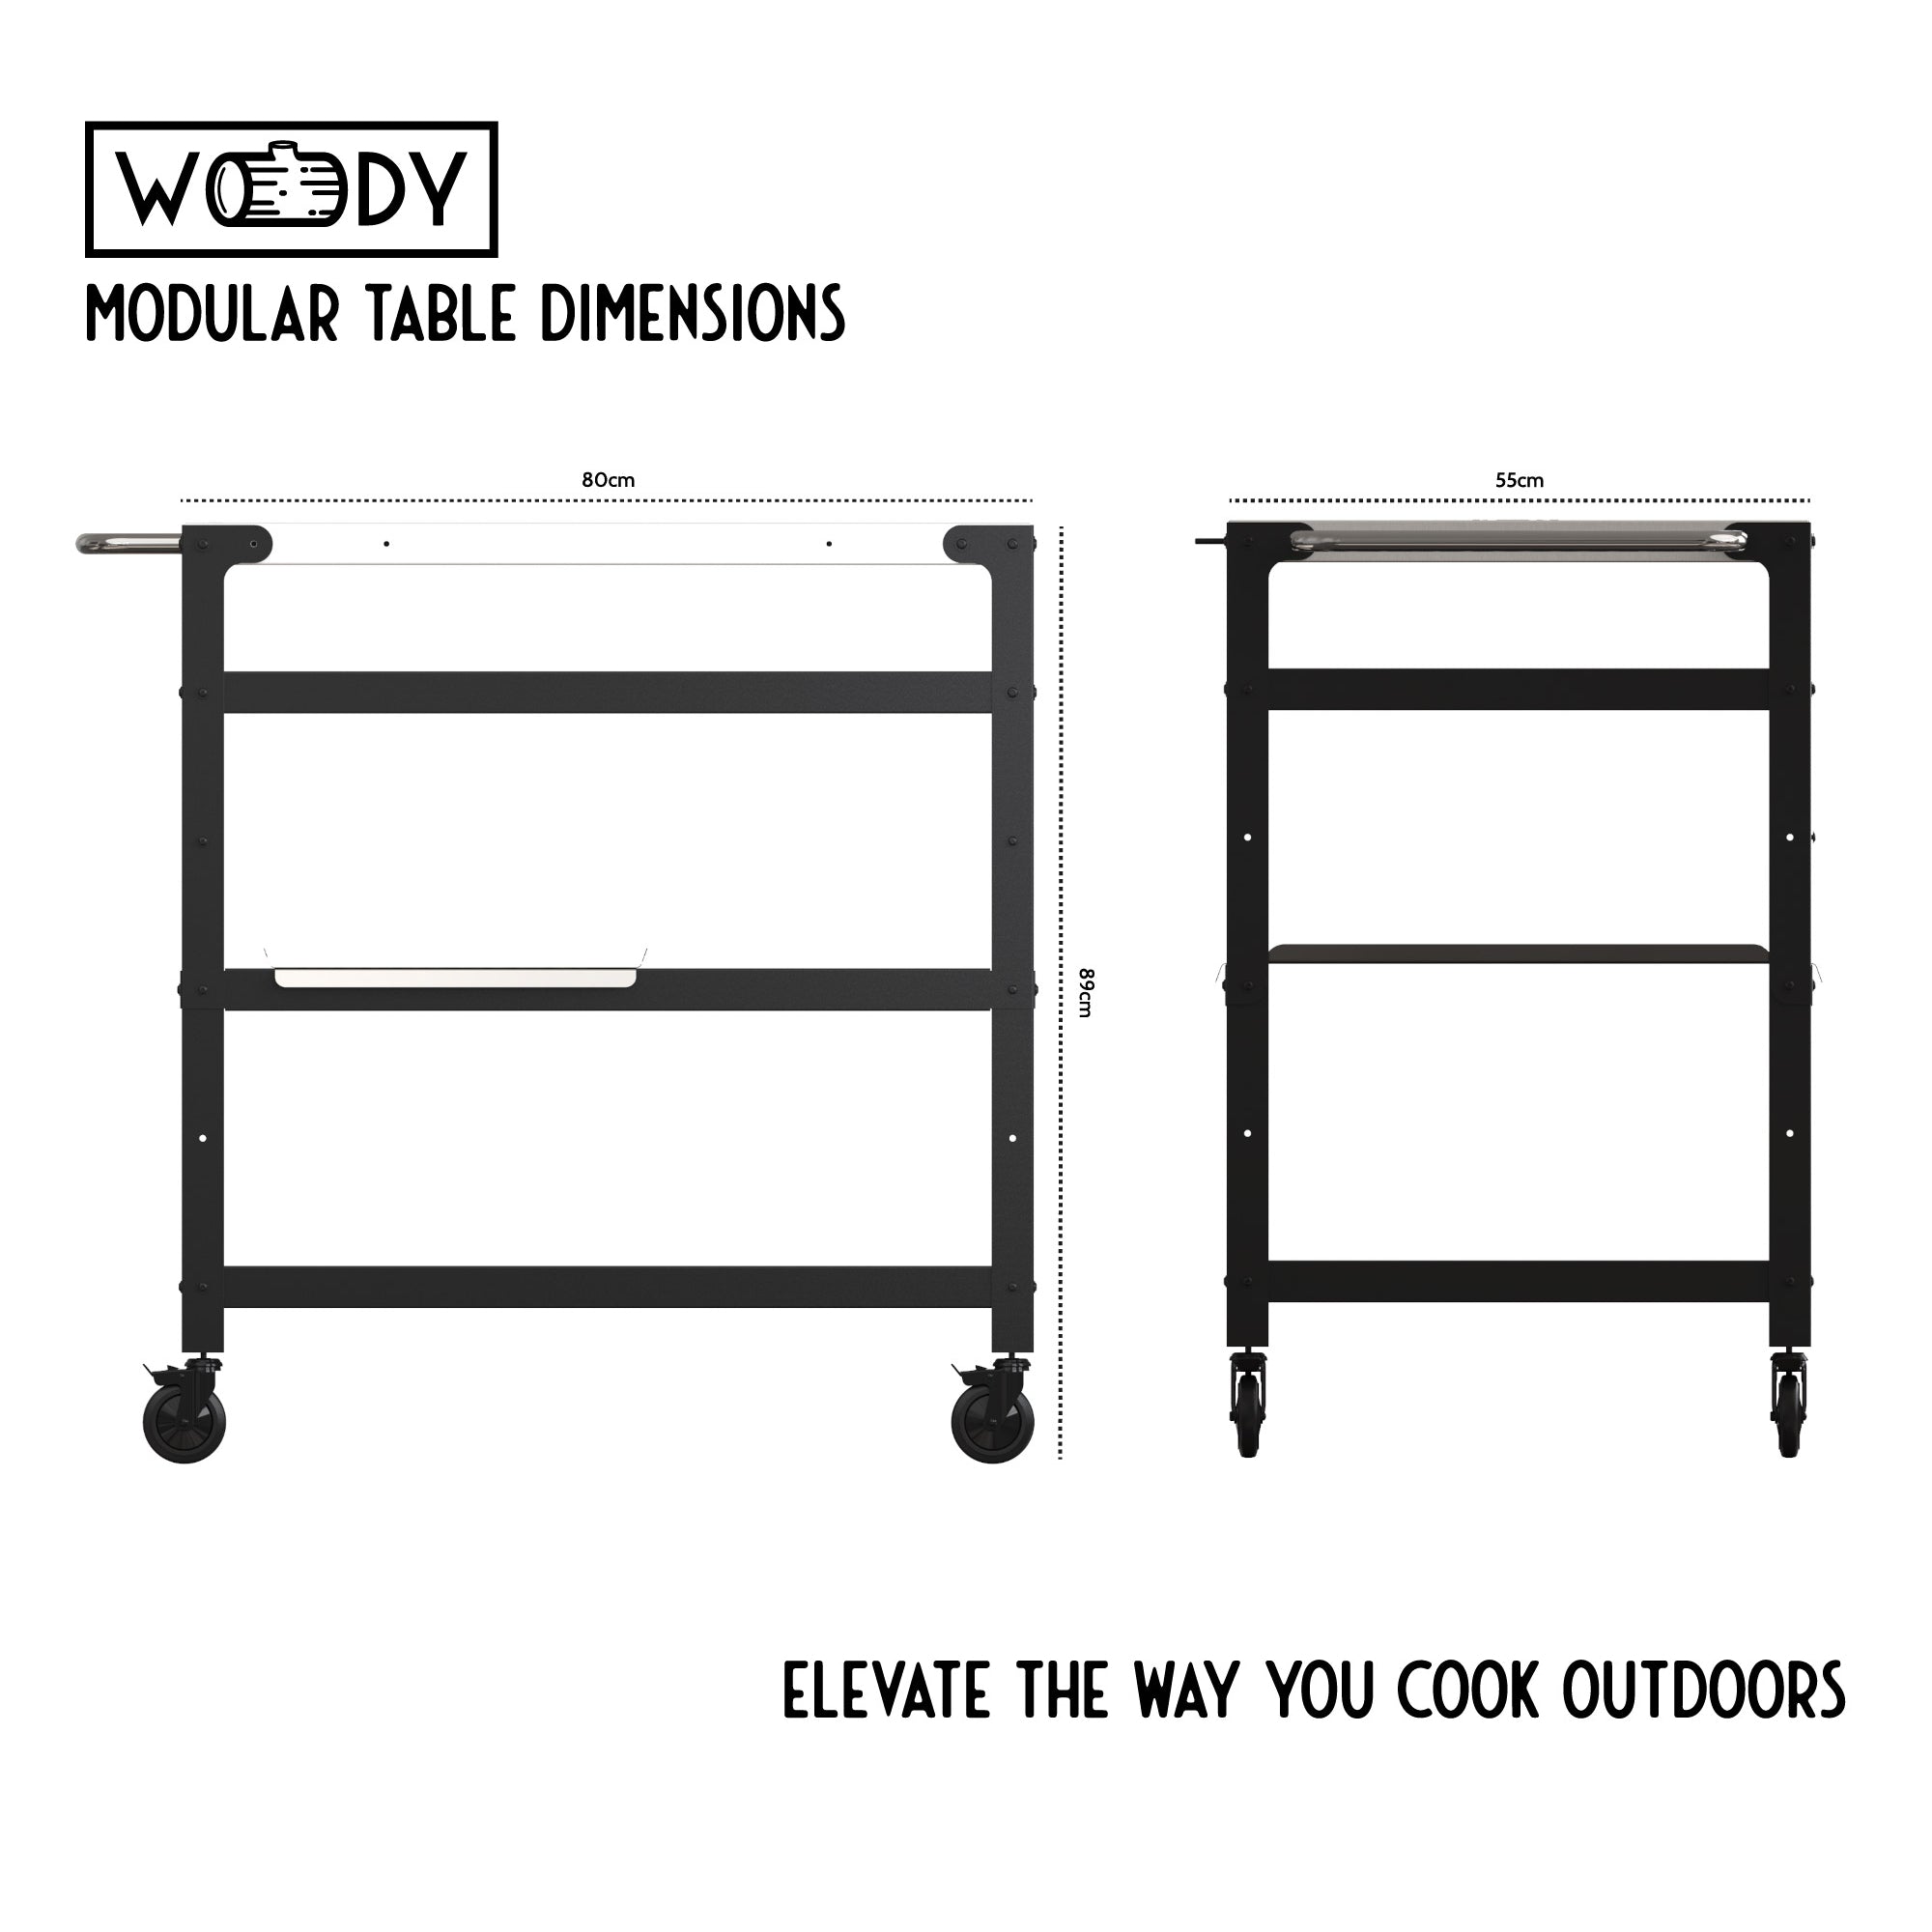 Woody Oven - Modular Pizza Oven Table